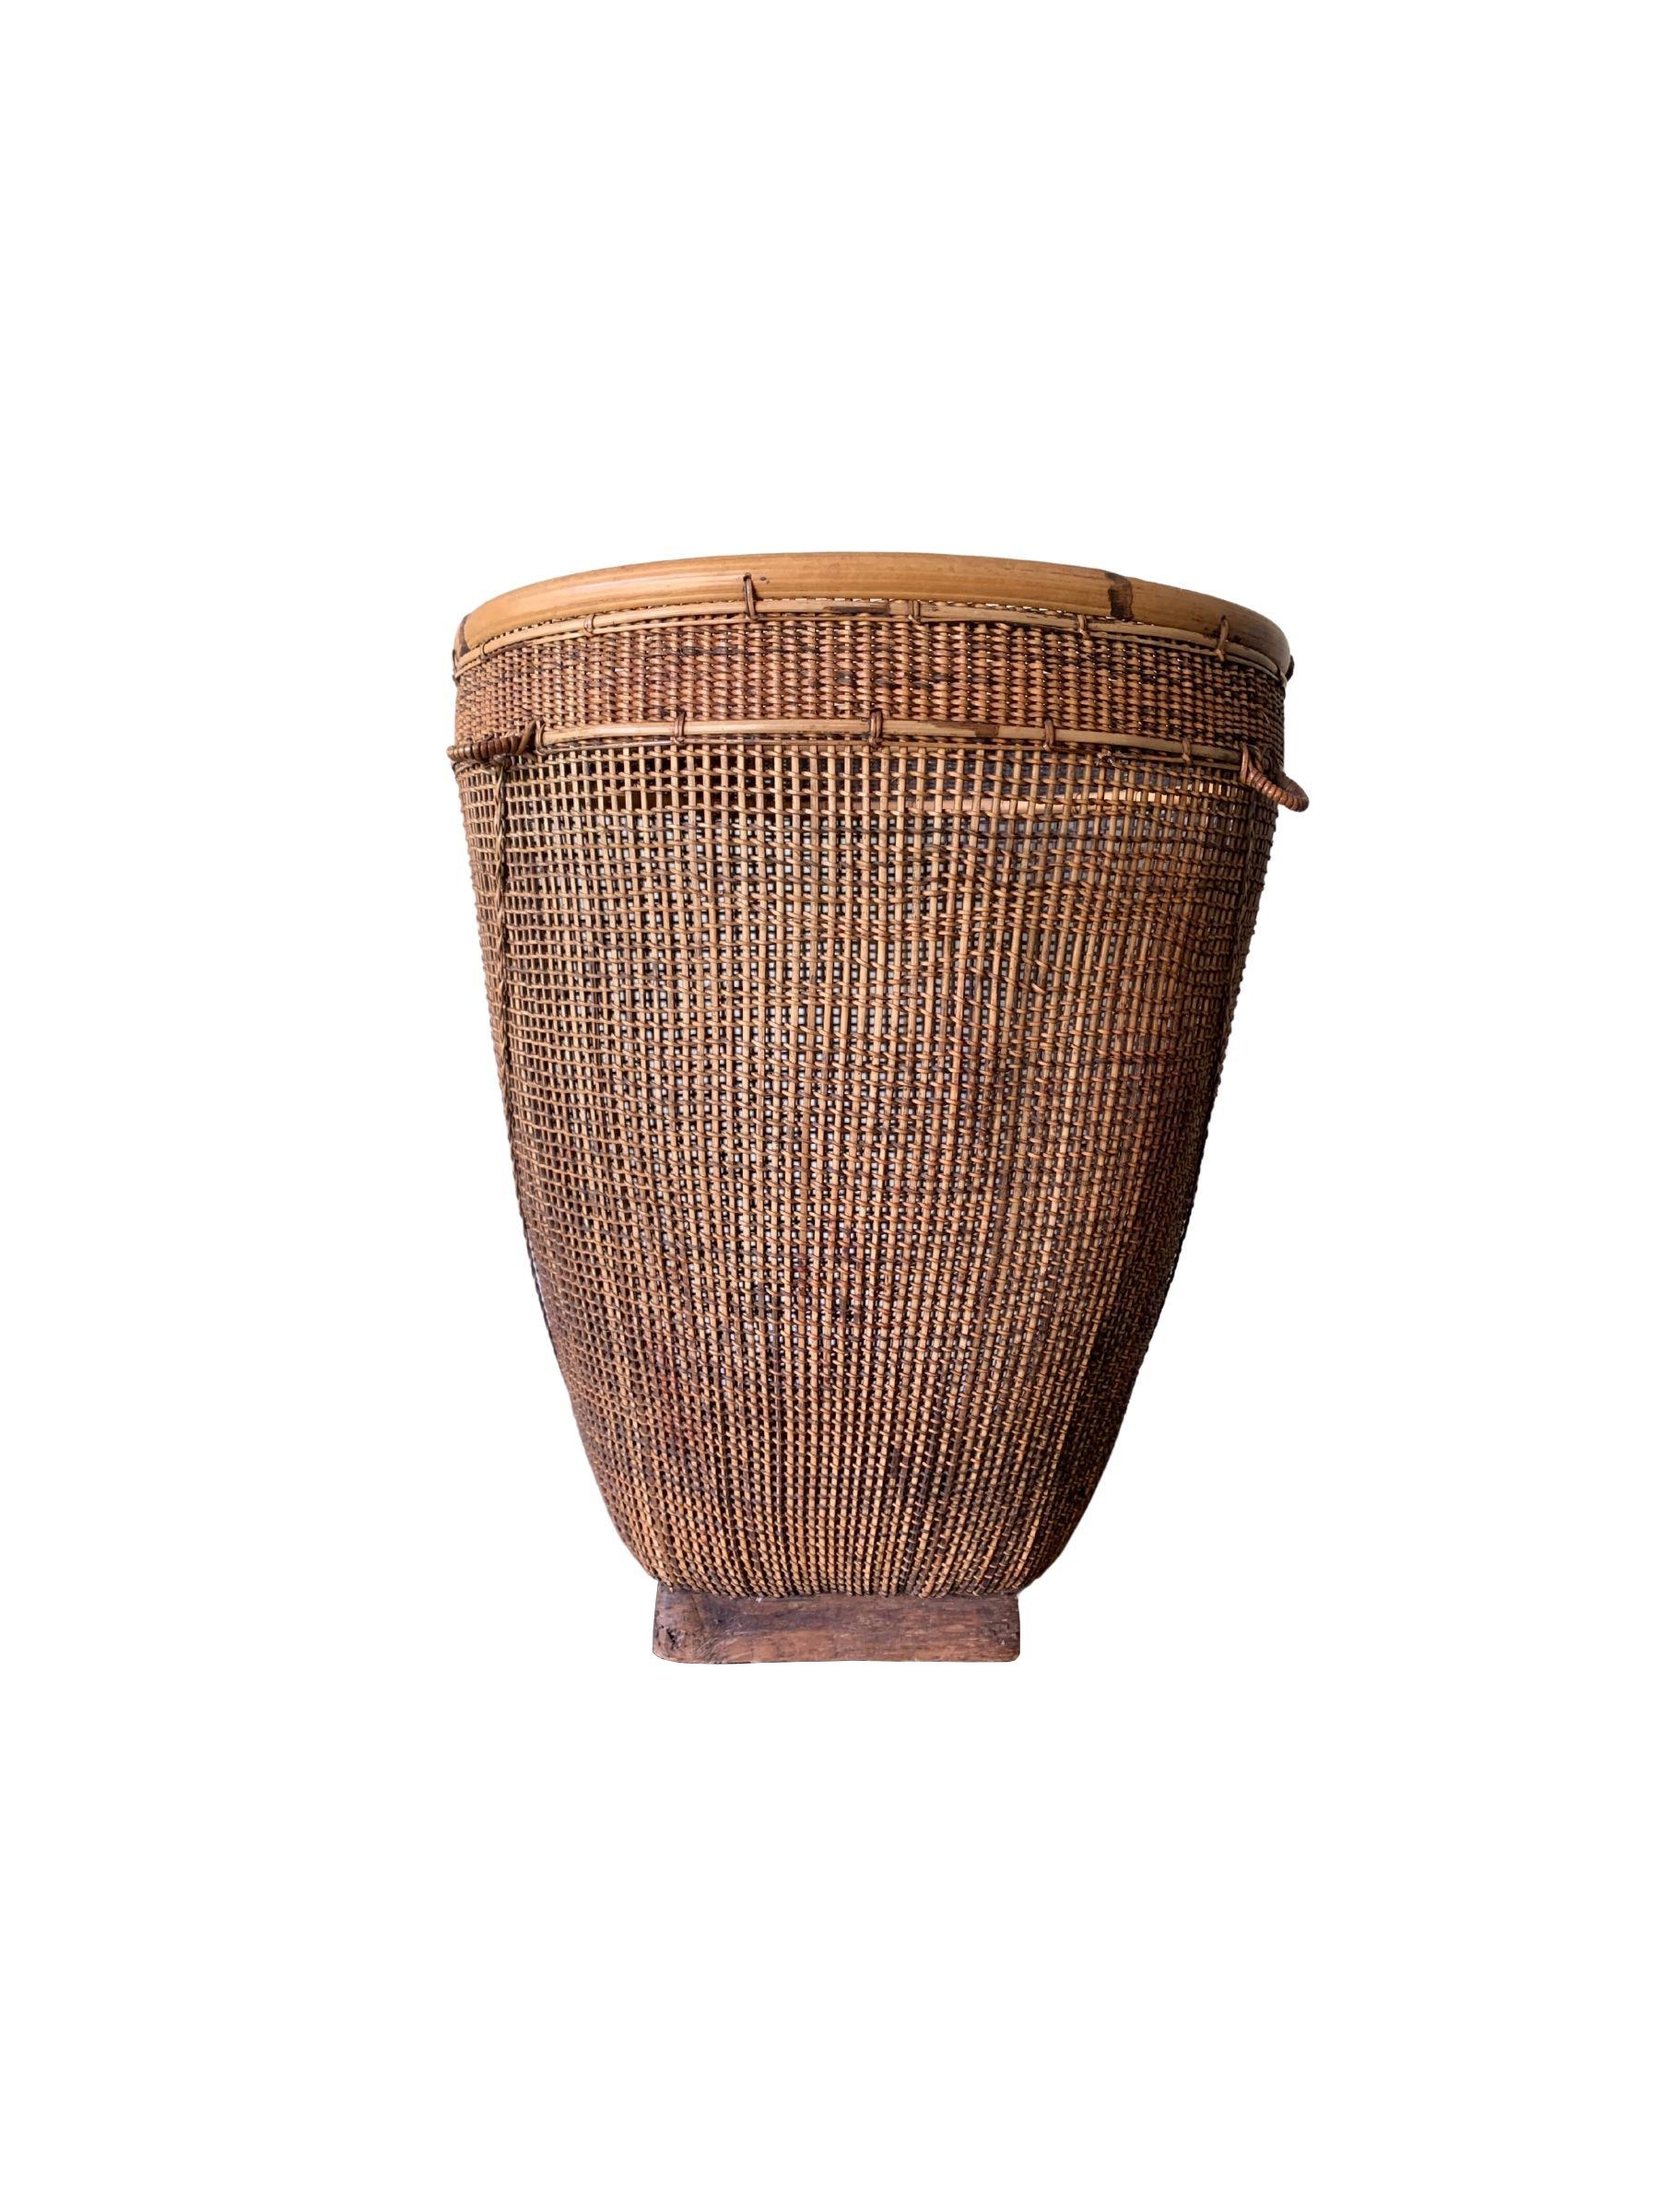 This mid-20th century hand-woven basket originates from the Dayak tribe of Borneo crafted with bamboo & rattan fibres. The frame is crafted from bamboo and the combination of weaving techniques of the bamboo & rattan create a stunning array of